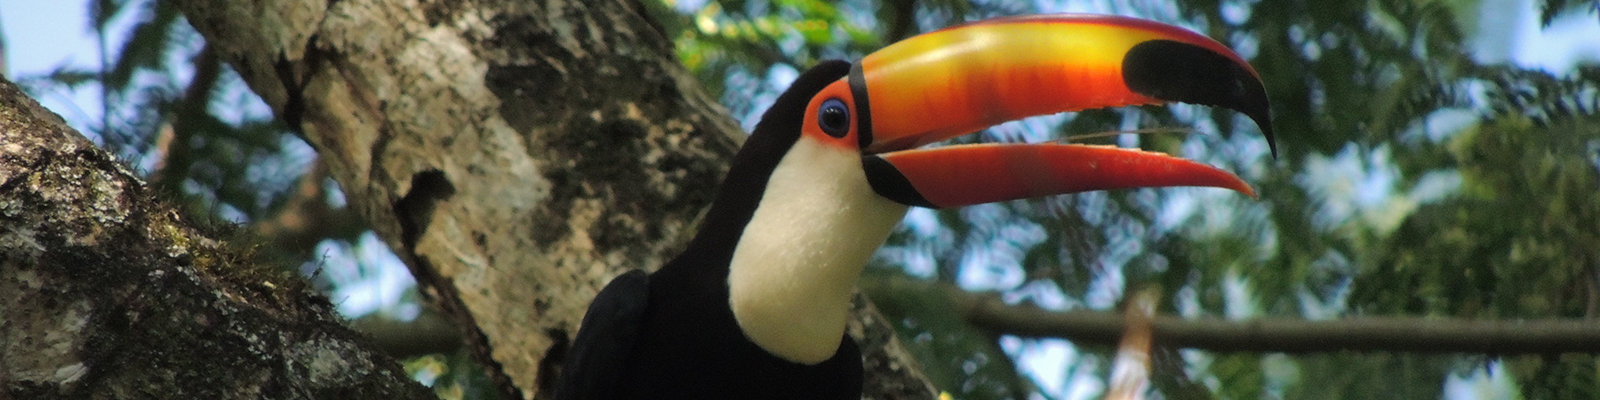 Photo from the First Photography Contest – PPGADR – Your Look on the Environment. Nature colors in free flight. Luiz Ricardo Galhardo. Profile of a black toucan with white chest, big yellow-and-black beak and black-and-blue eyes, perched on a tree trunk.